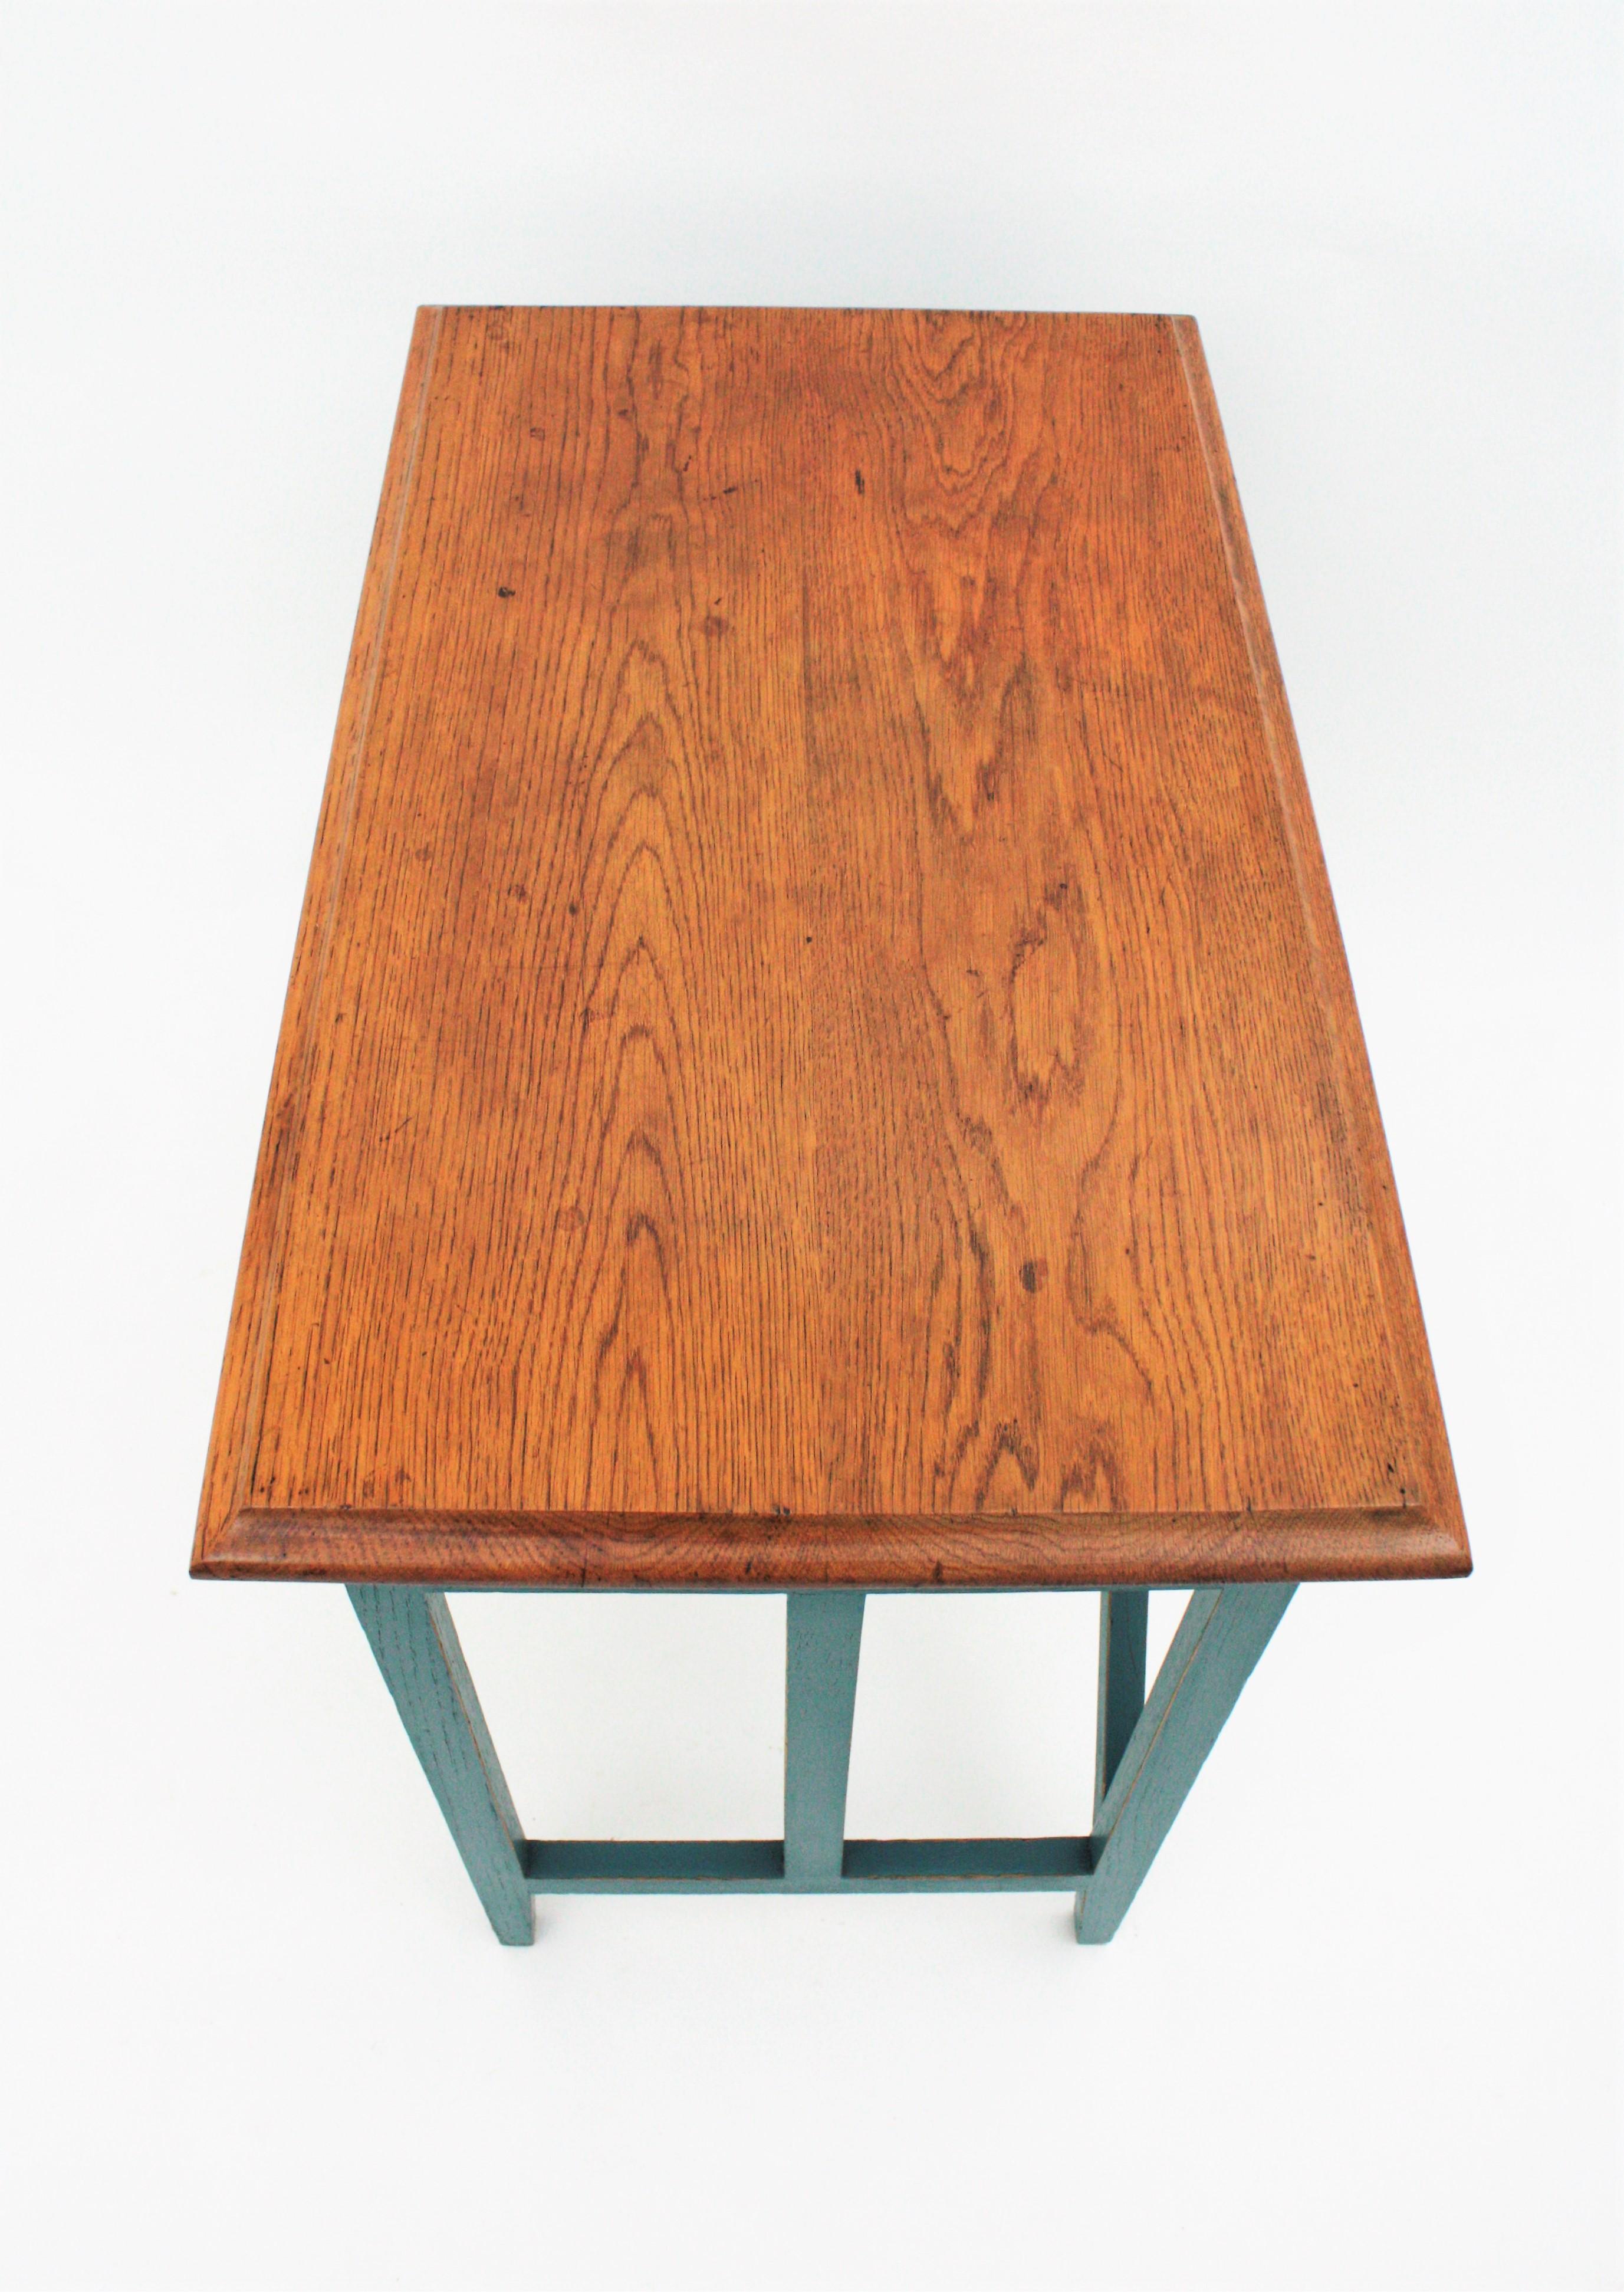 Spanish Desk and Stool in Oak with Green Blue Patina, 1930s For Sale 9